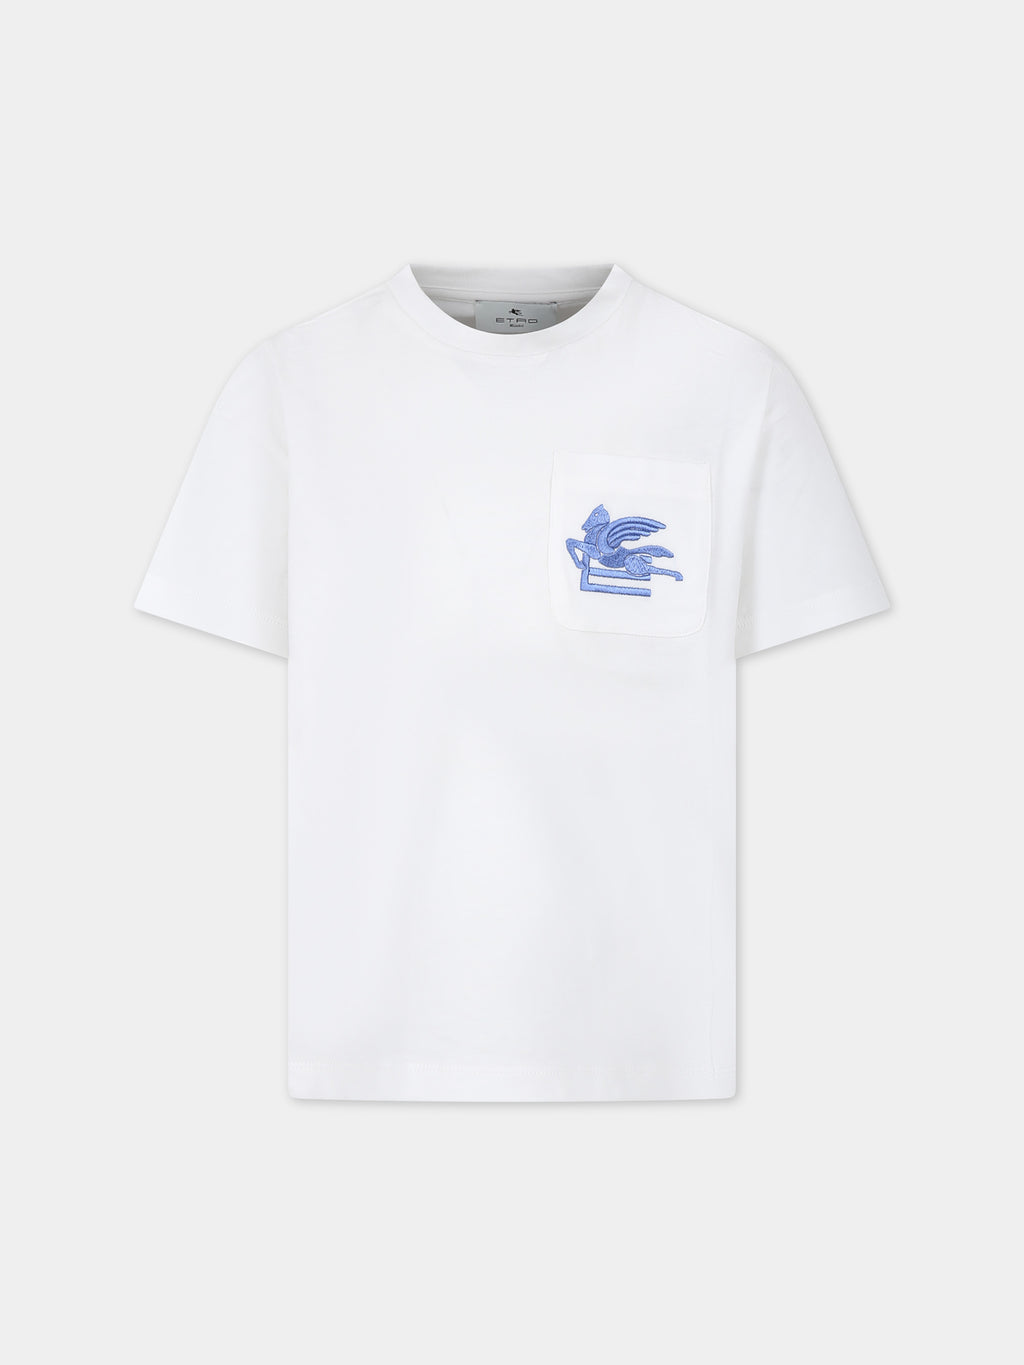 White t-shirt for kids with iconic Pegasus